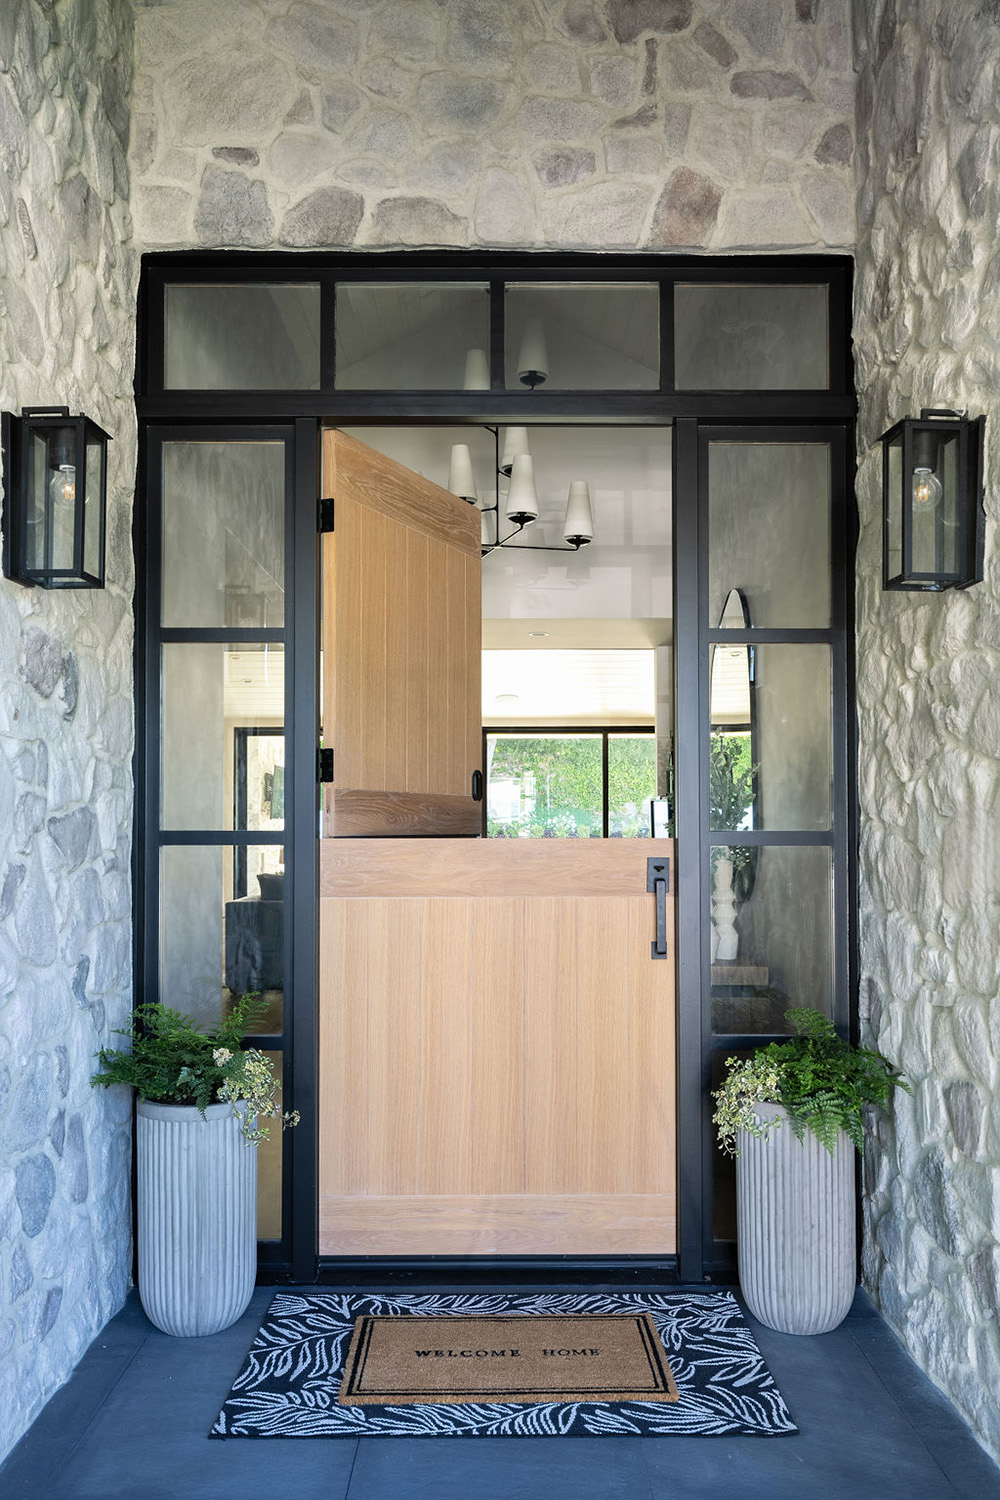 home entrance area with stone walls, black-framed windows and wood dutch door